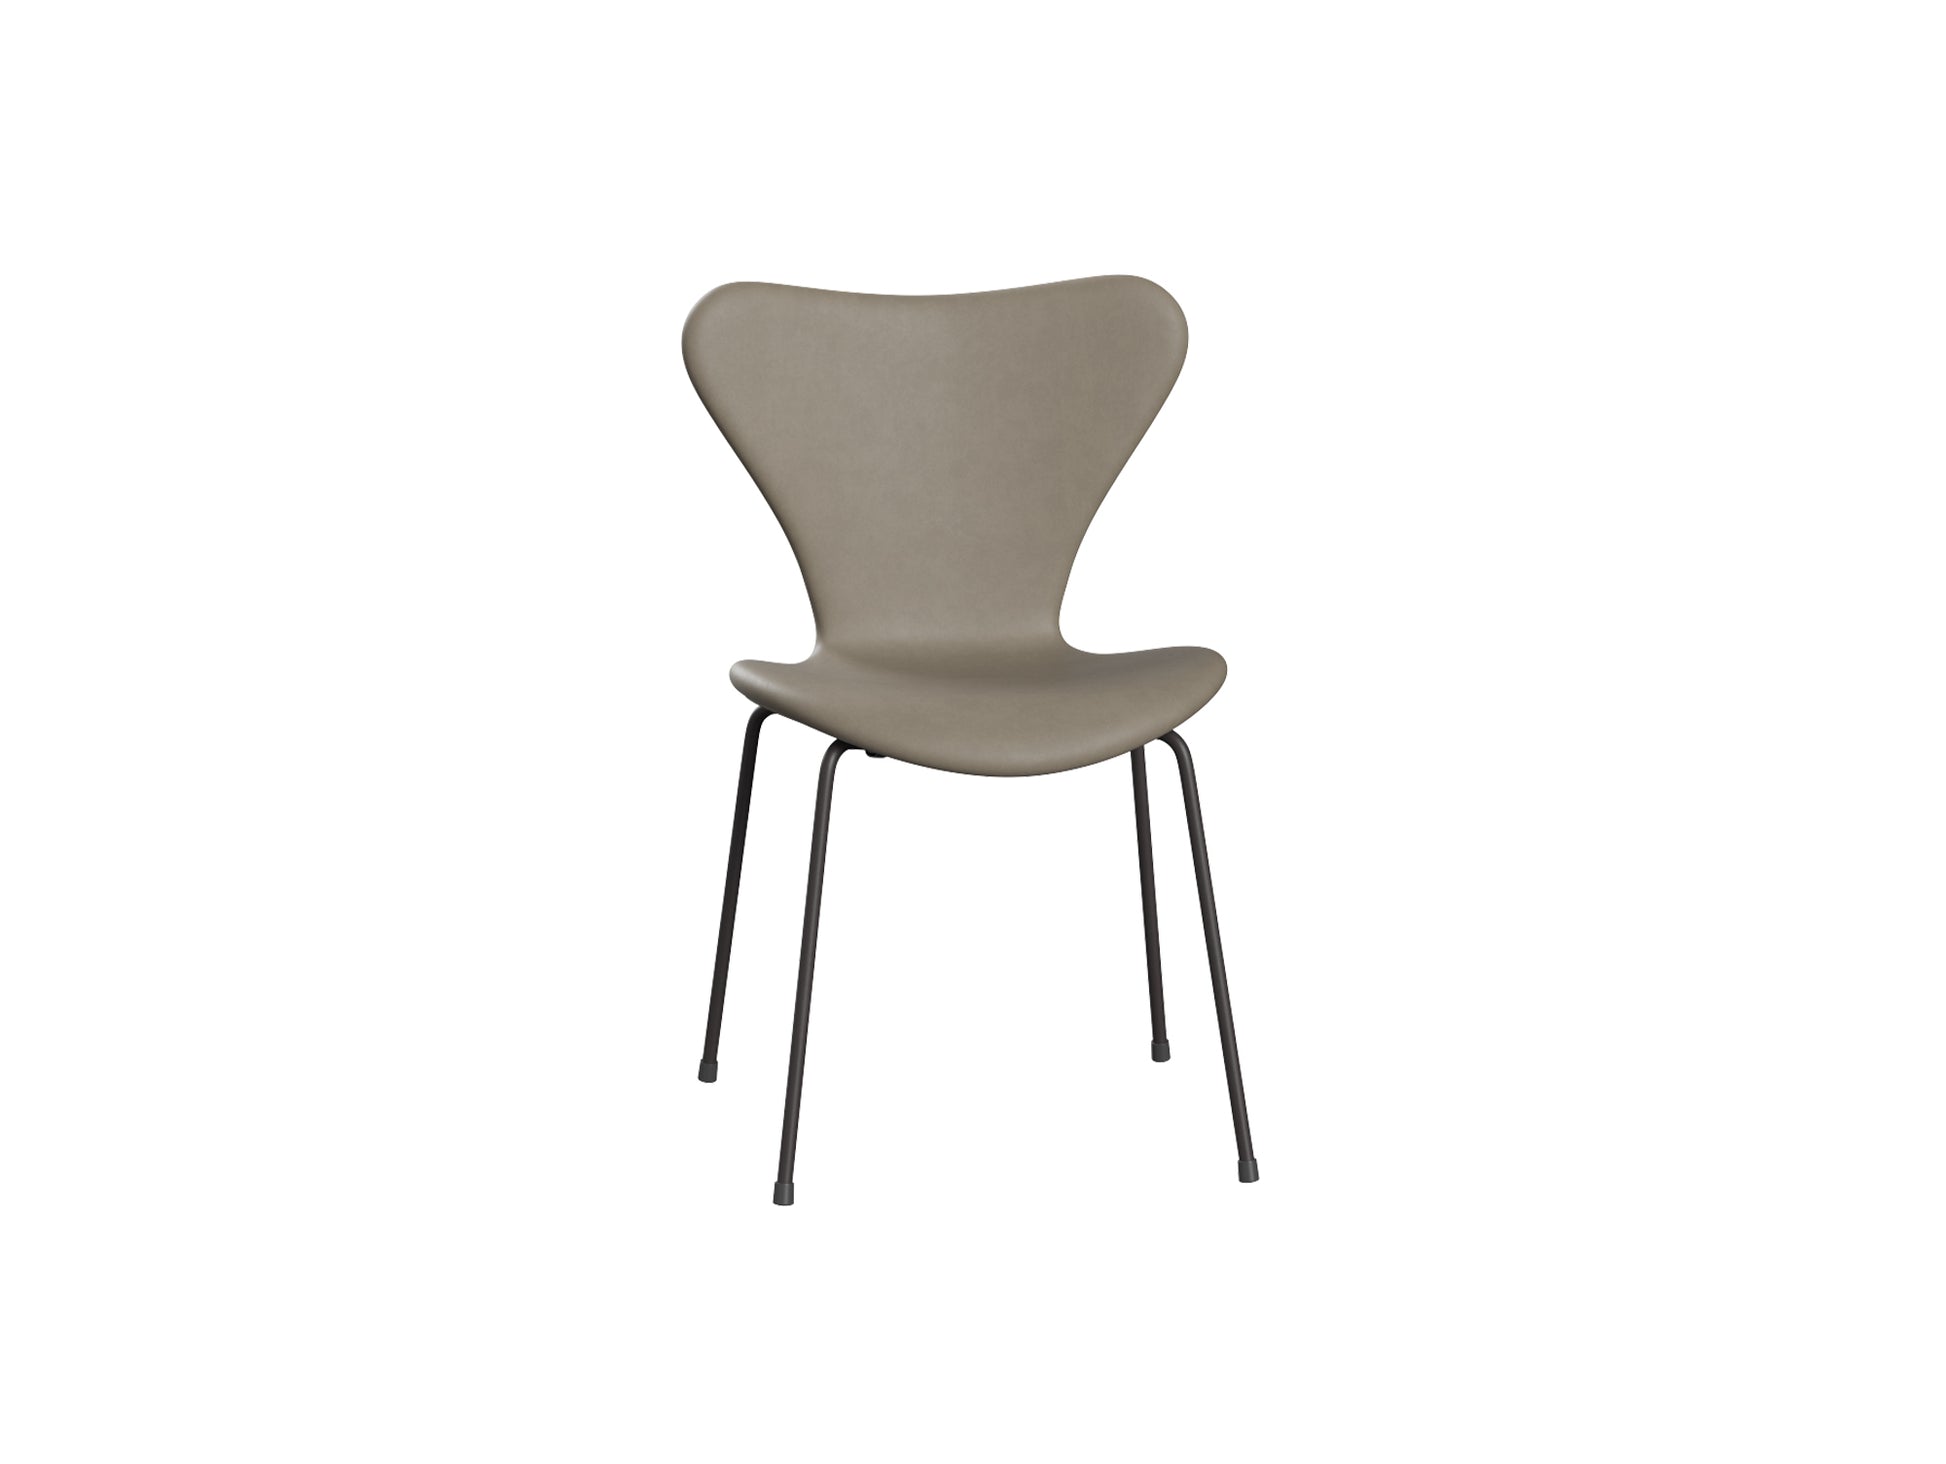 Series 7™ 3107 Dining Chair (Fully Upholstered) by Fritz Hansen - Warm Graphite Steel / Essential Light Grey Leather